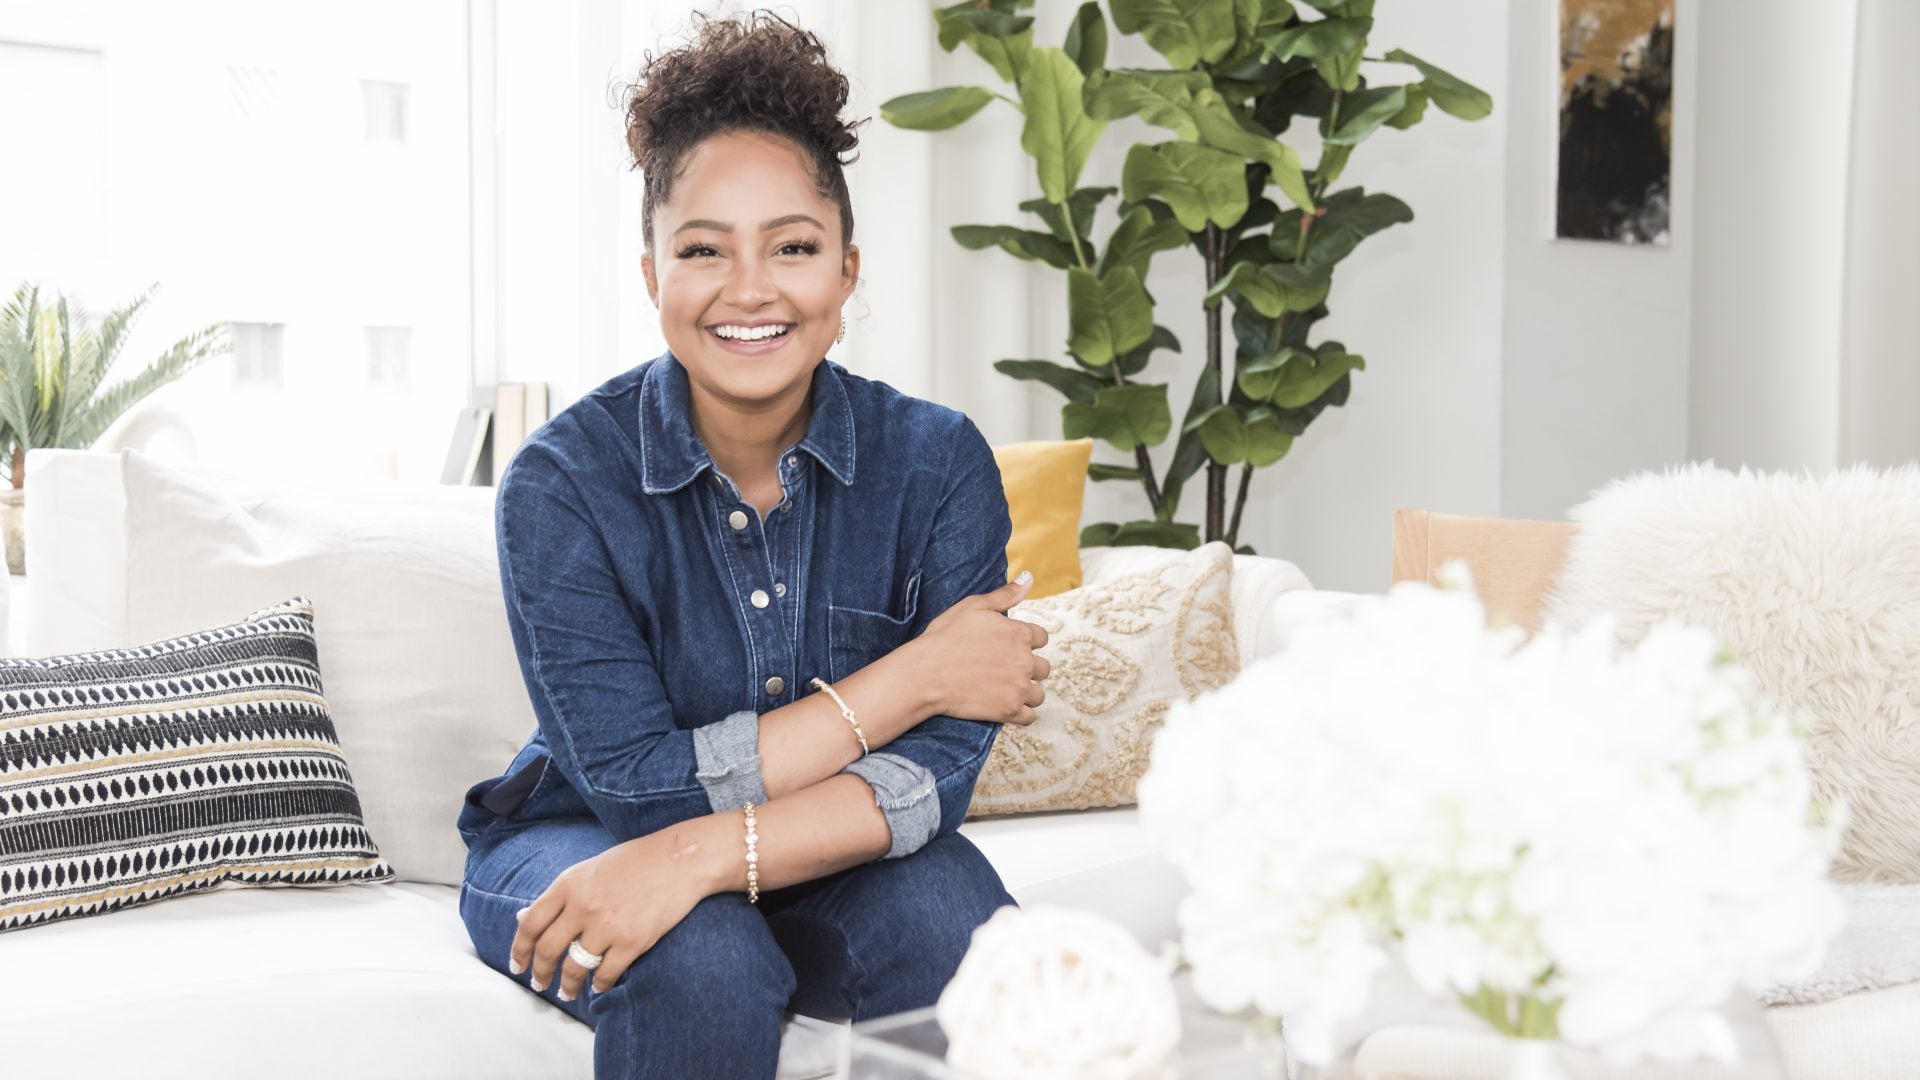 3 Tips to Thrive in Business from Sprinkle of Jesus Founder, Dana Chanel